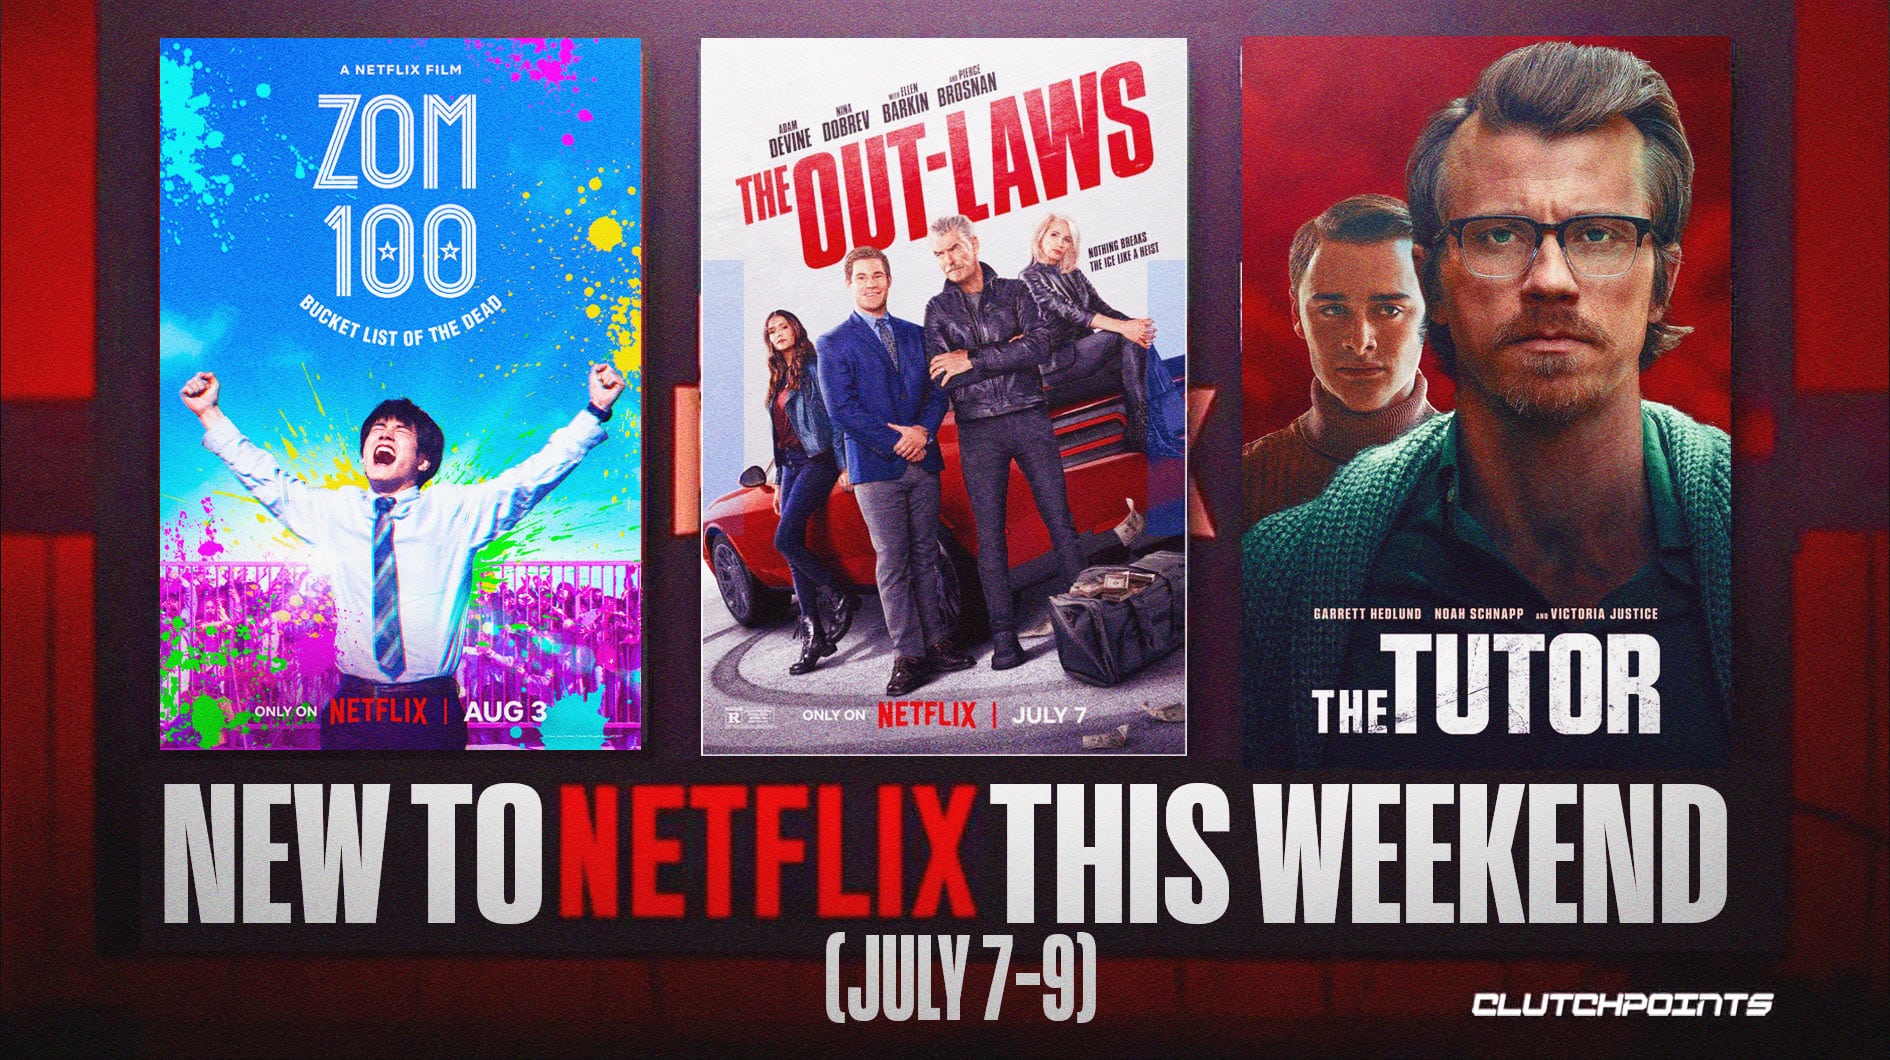 New on Netflix this weekend (July 7-9)